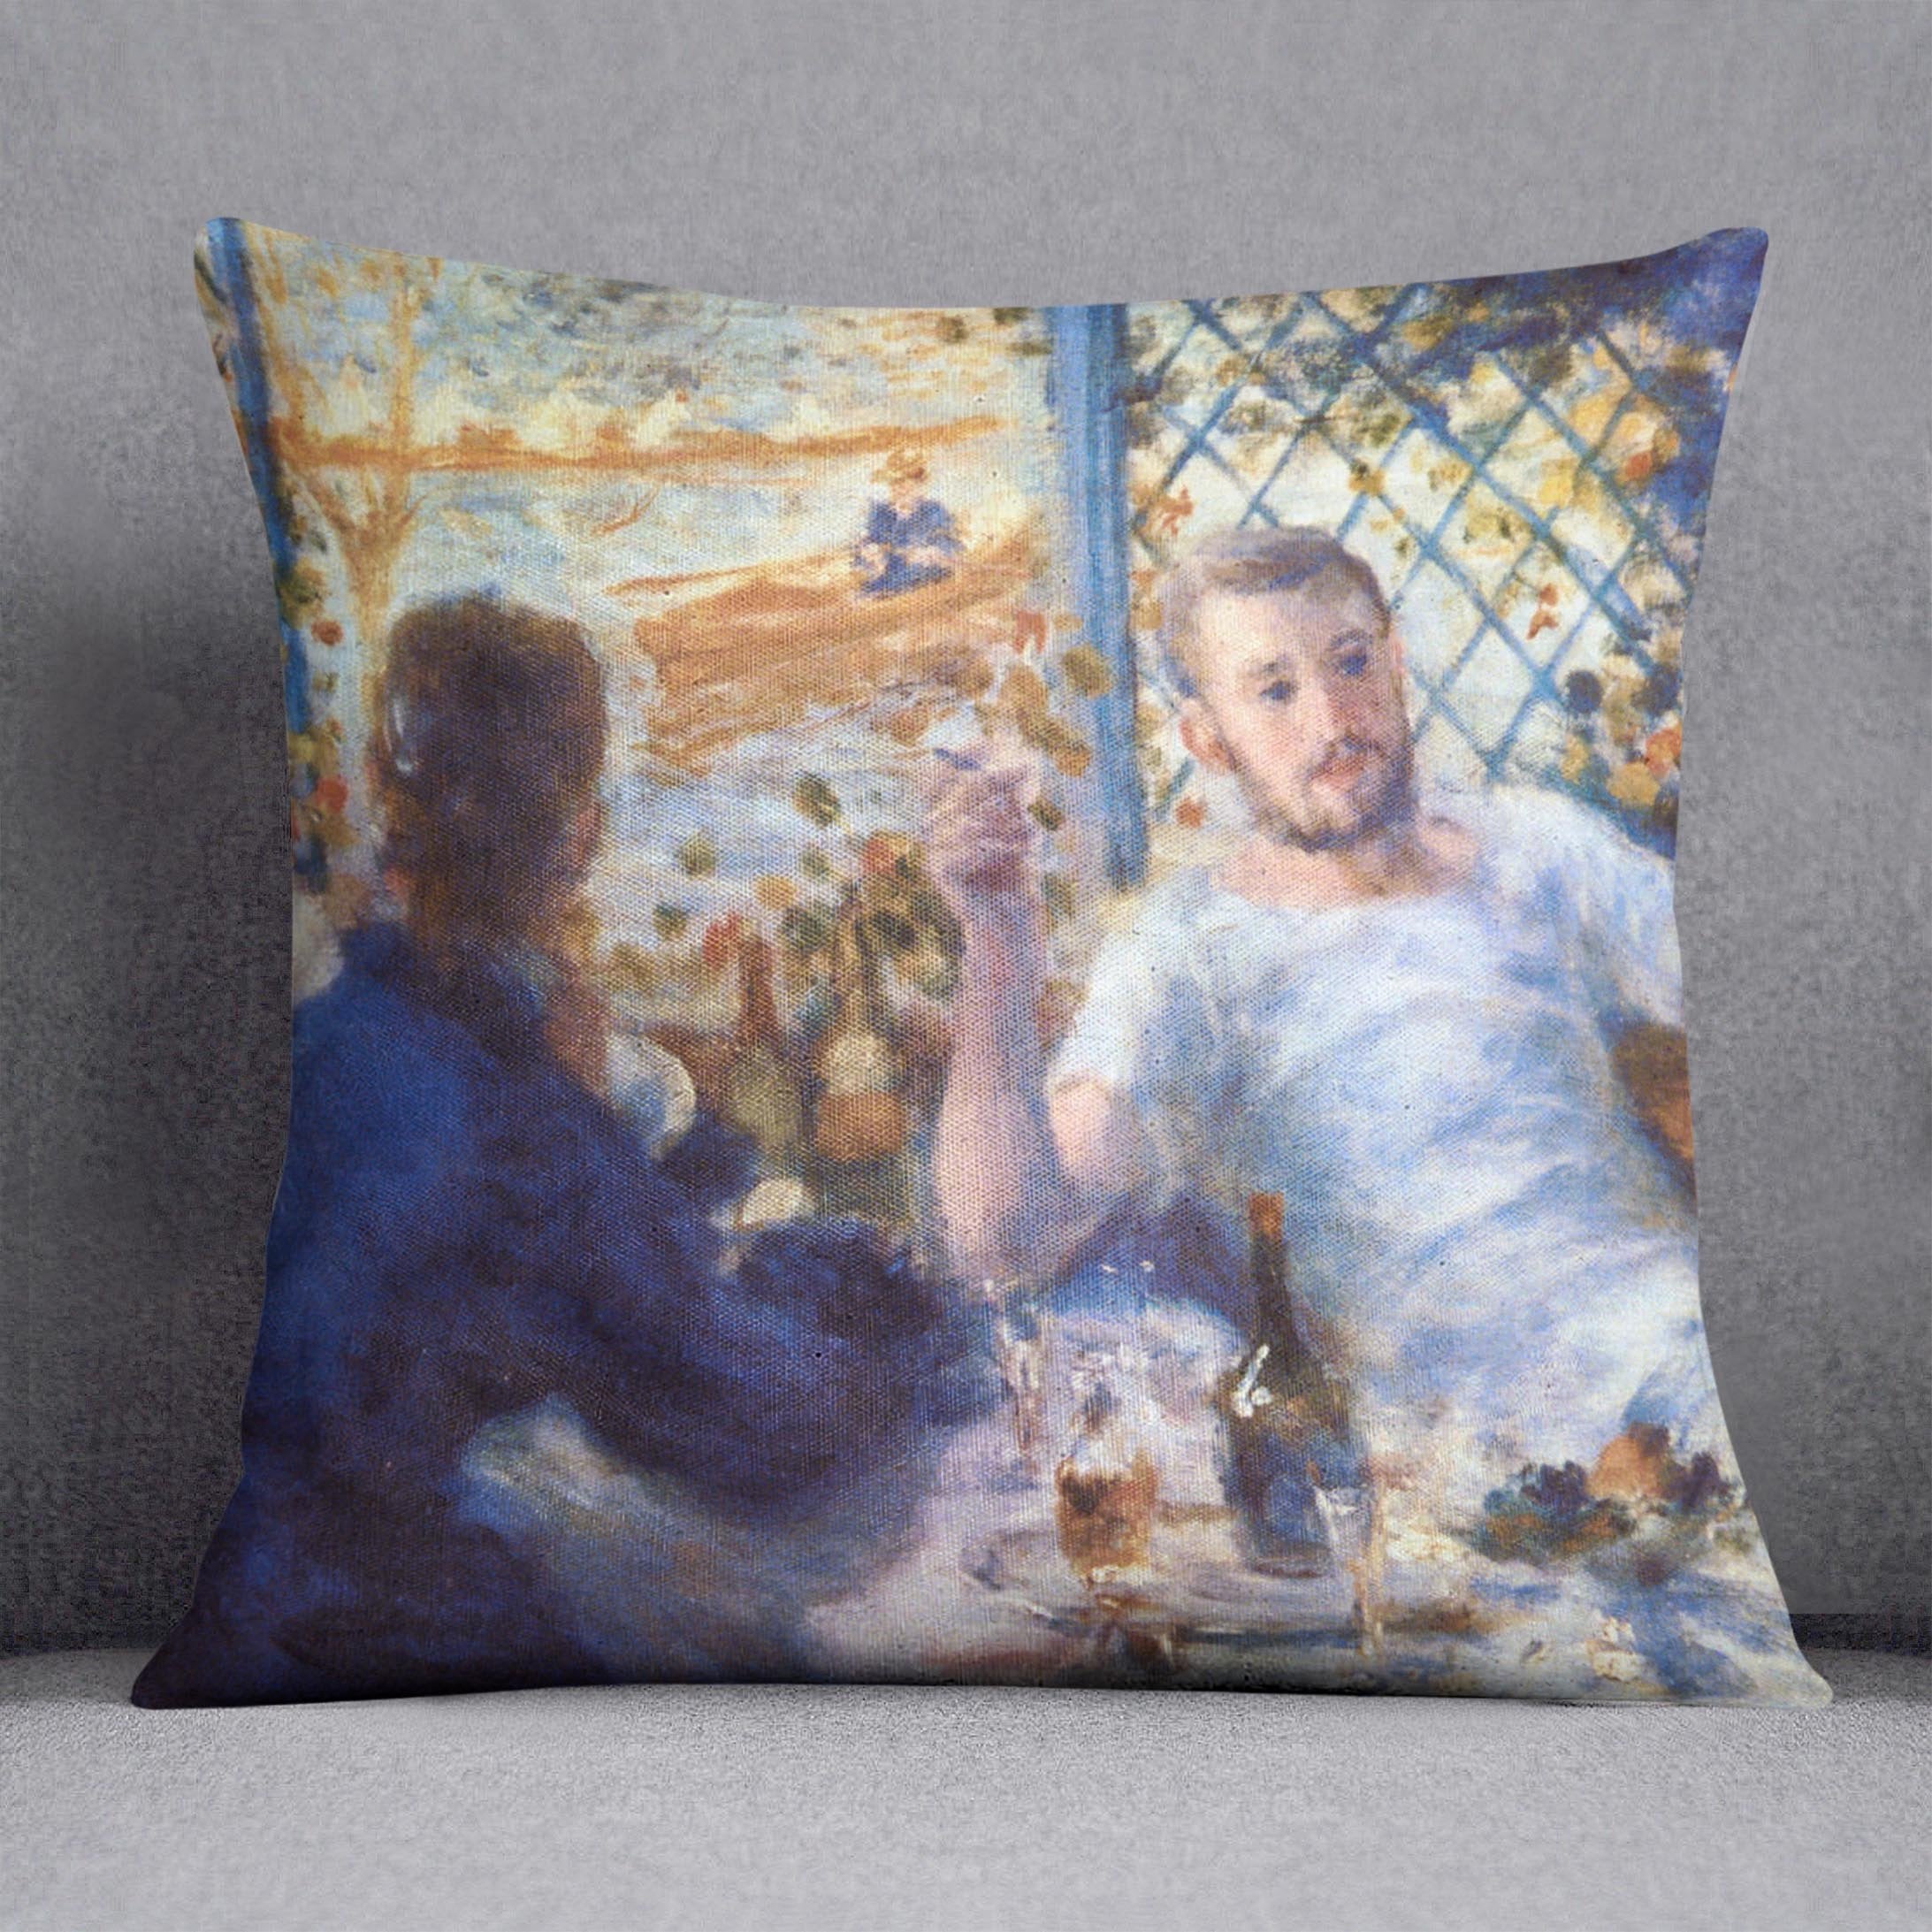 The Rowers Lunch by Renoir Throw Pillow